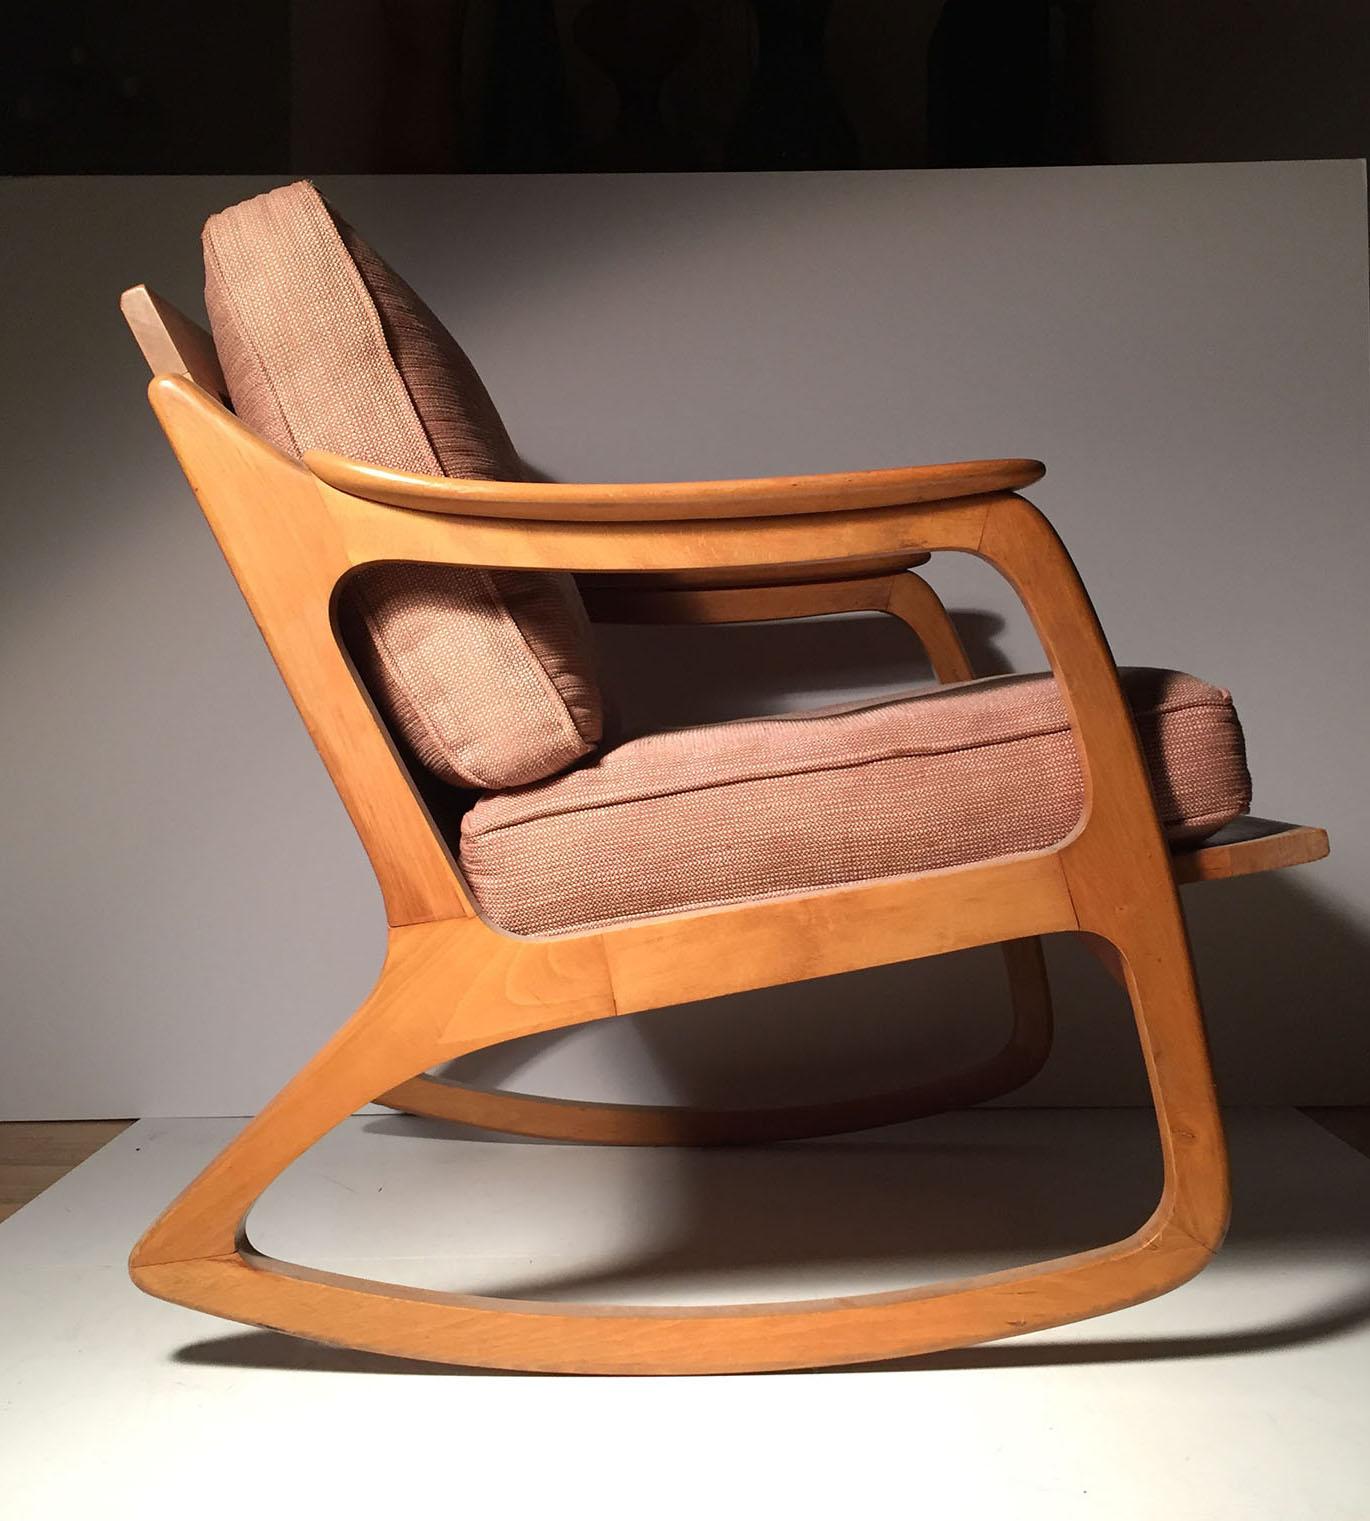 Adorable chair form by Lawrence Peabody. Well constructed. In the style of Danish Modern, Scandinavian design, Adrian Pearsall, Milo Baughman.